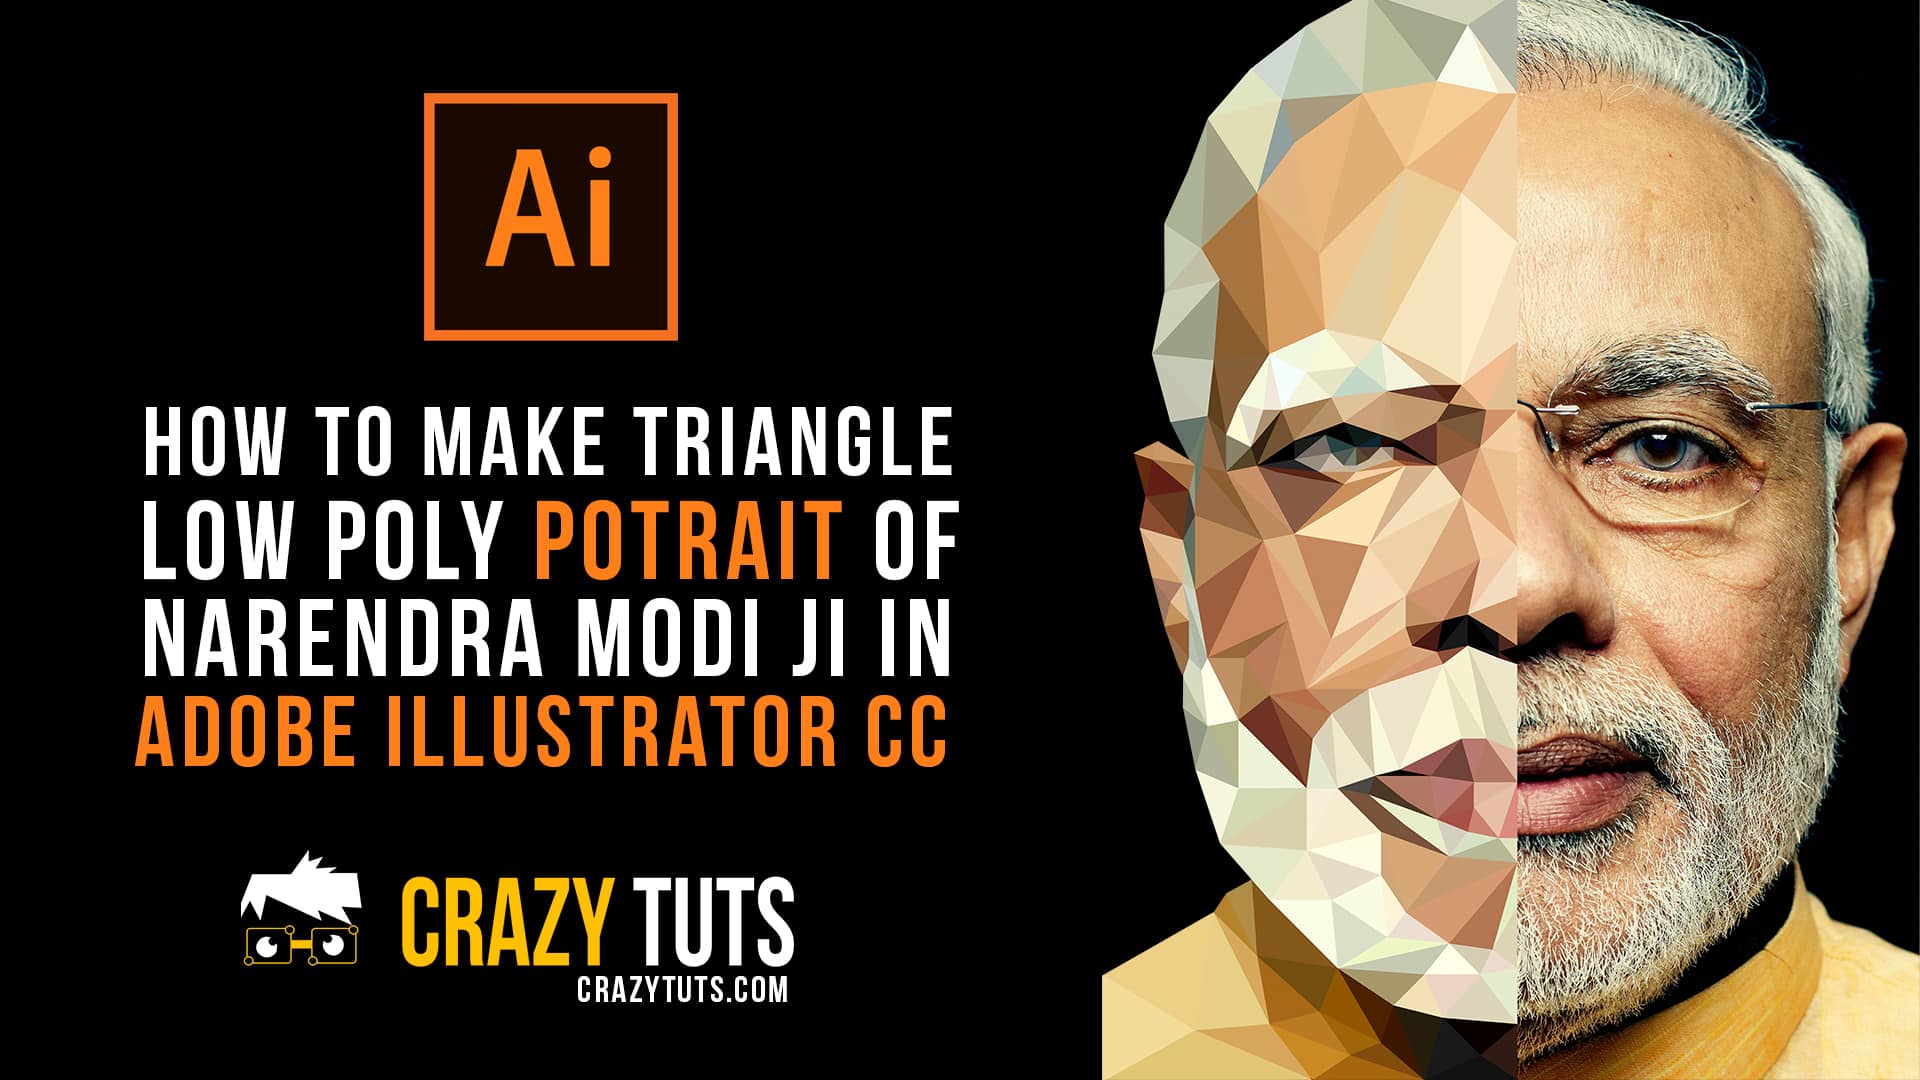 Tips to guide you to the best local mechanics and how to judge the repair estimate · check for certification a quality mechanic and shop should . Triangle Low Poly Portrait of Narendra Modi ji (PM of